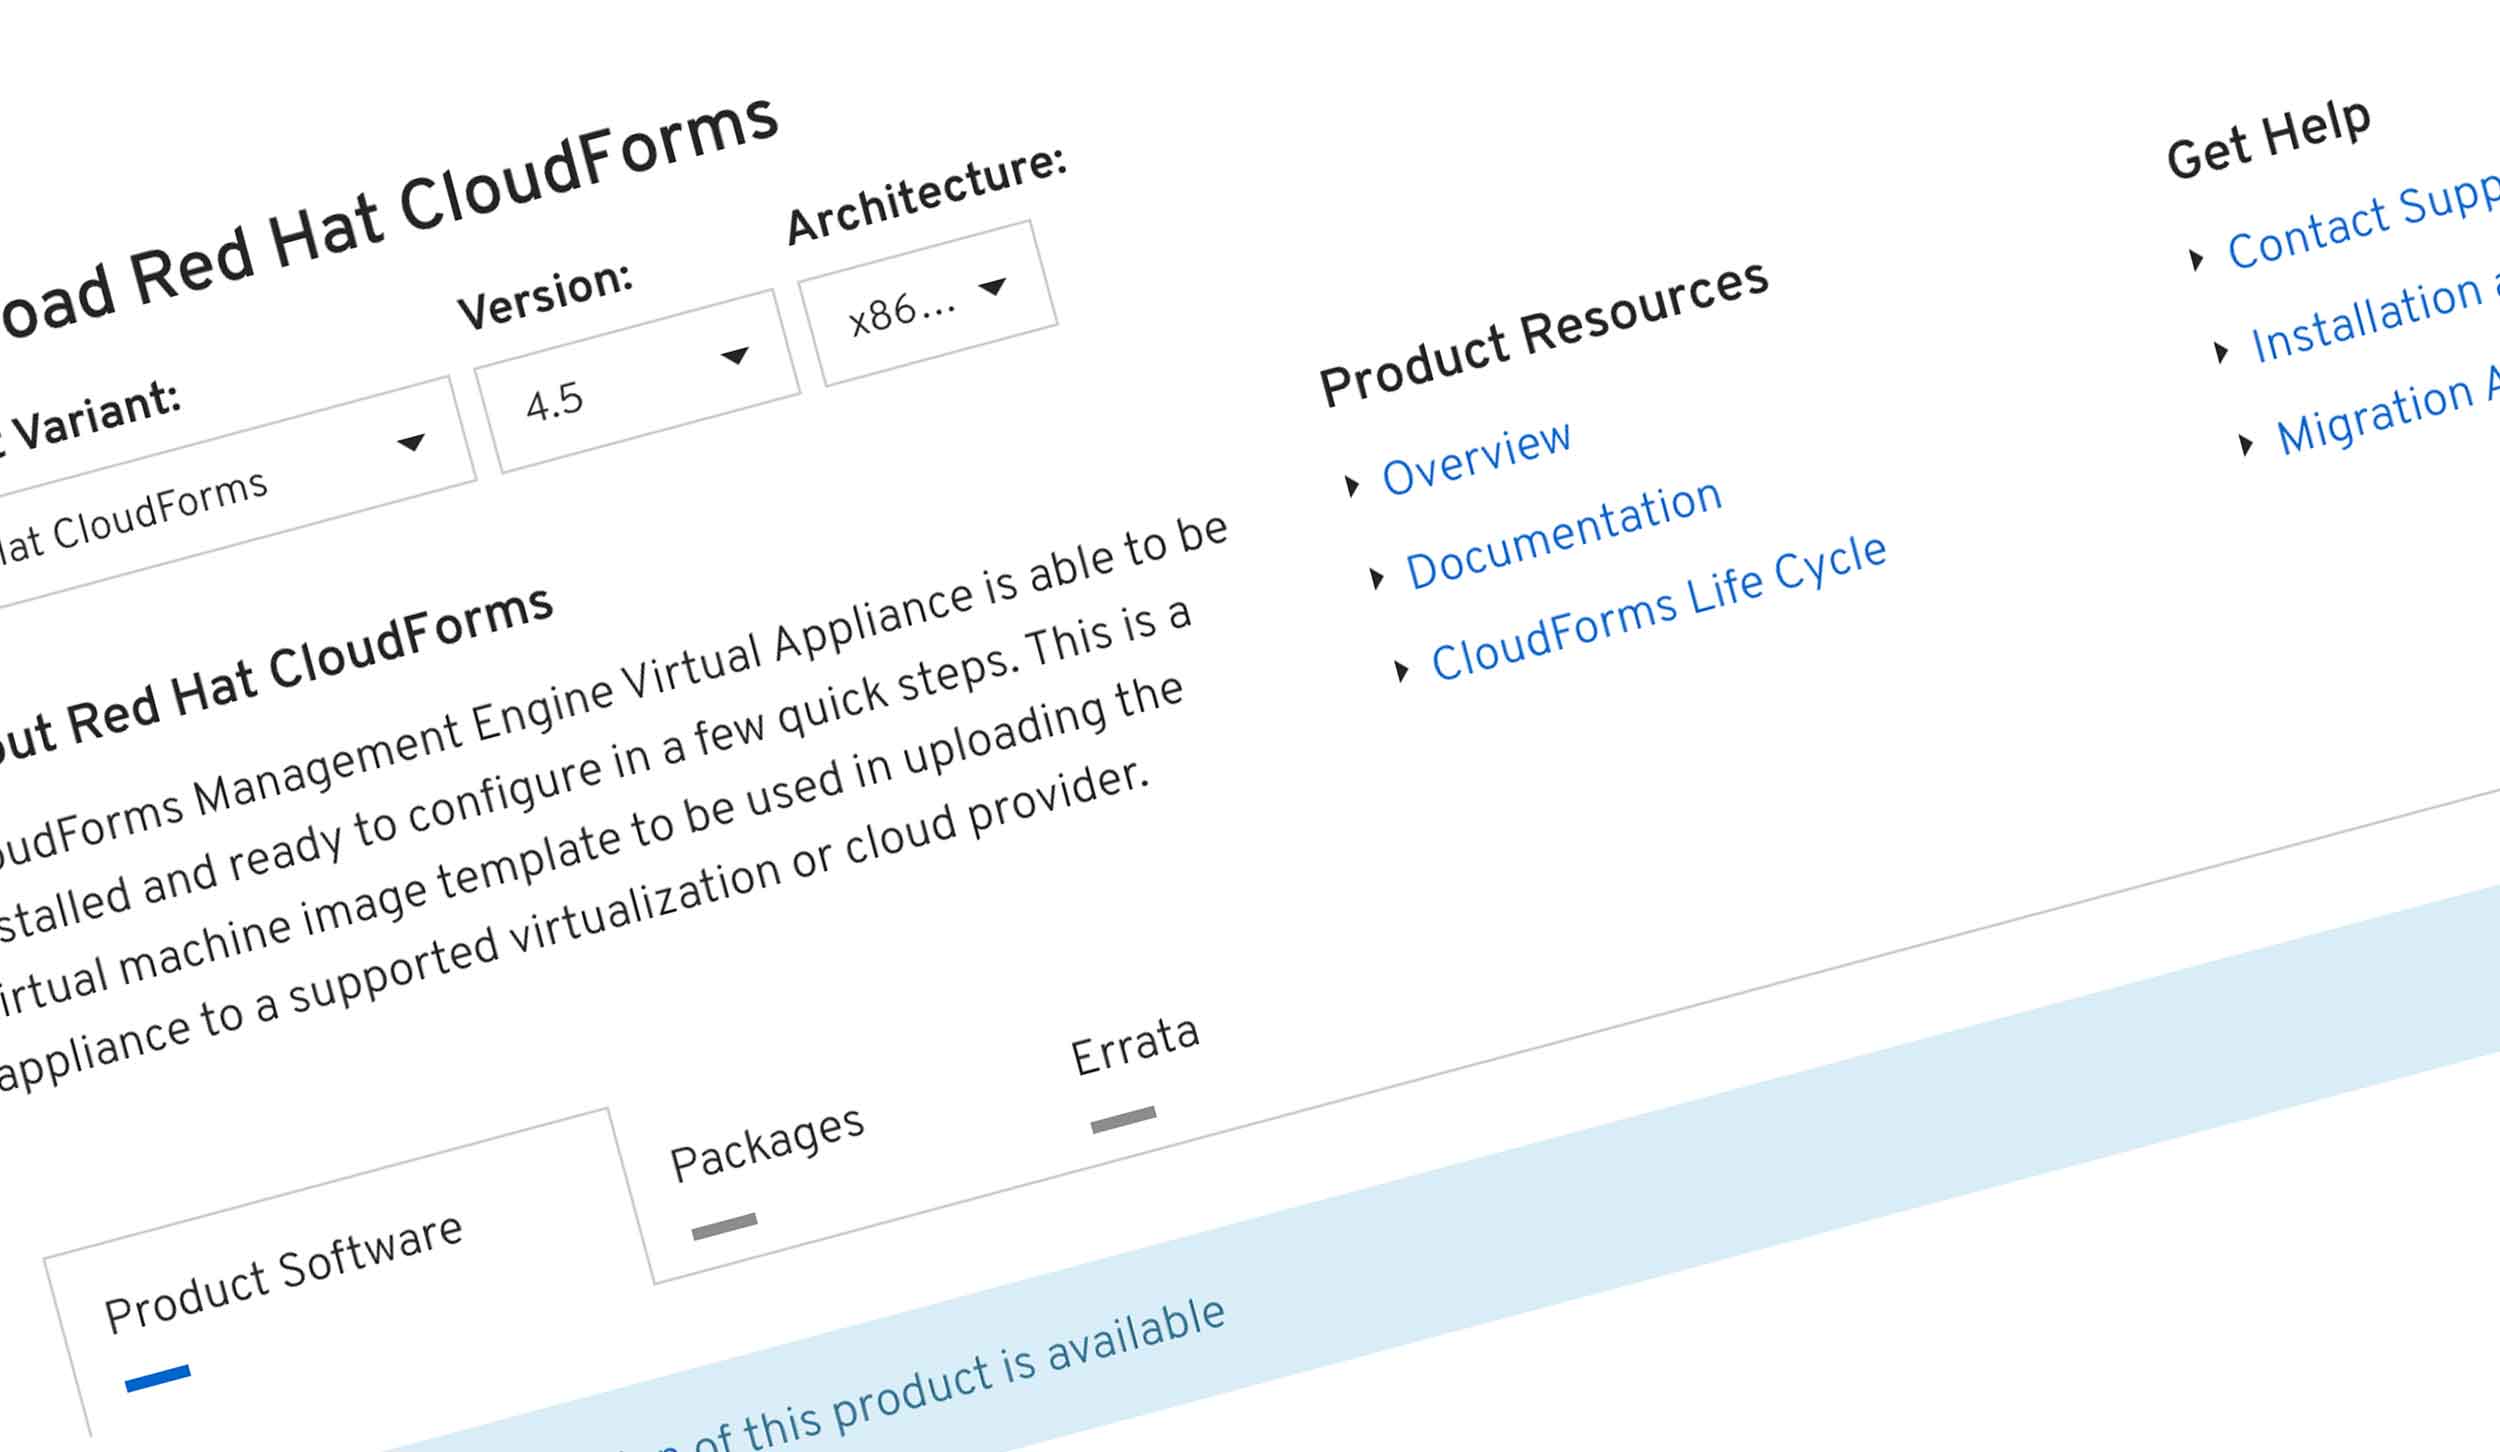 Red Hat Cloudforms Improvements